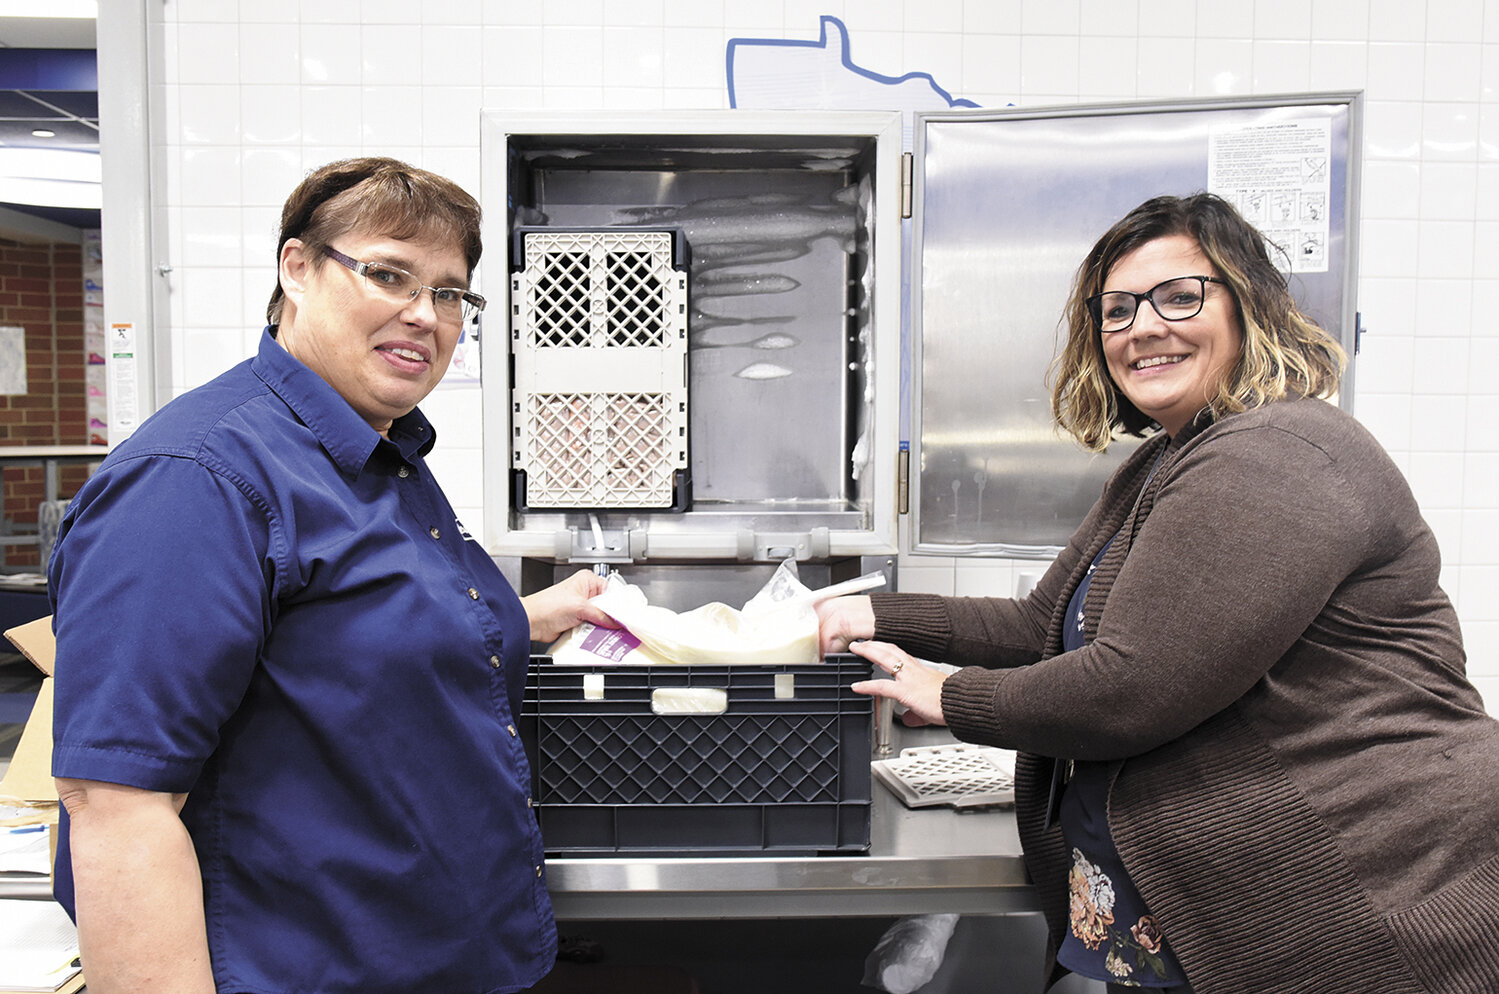 Director of food service Patty Viaene (left) and principal Laura Spanier prepare to add a 50-pound bag of milk to one of the milk dispenser machines Nov. 9 at Belgrade-Brooten-Elrosa High School in Belgrade, Minnesota. During the school’s adjustment from milk cartons to dispensers, various staff, including Spanier, have stepped in to help change bags during lunchtime.